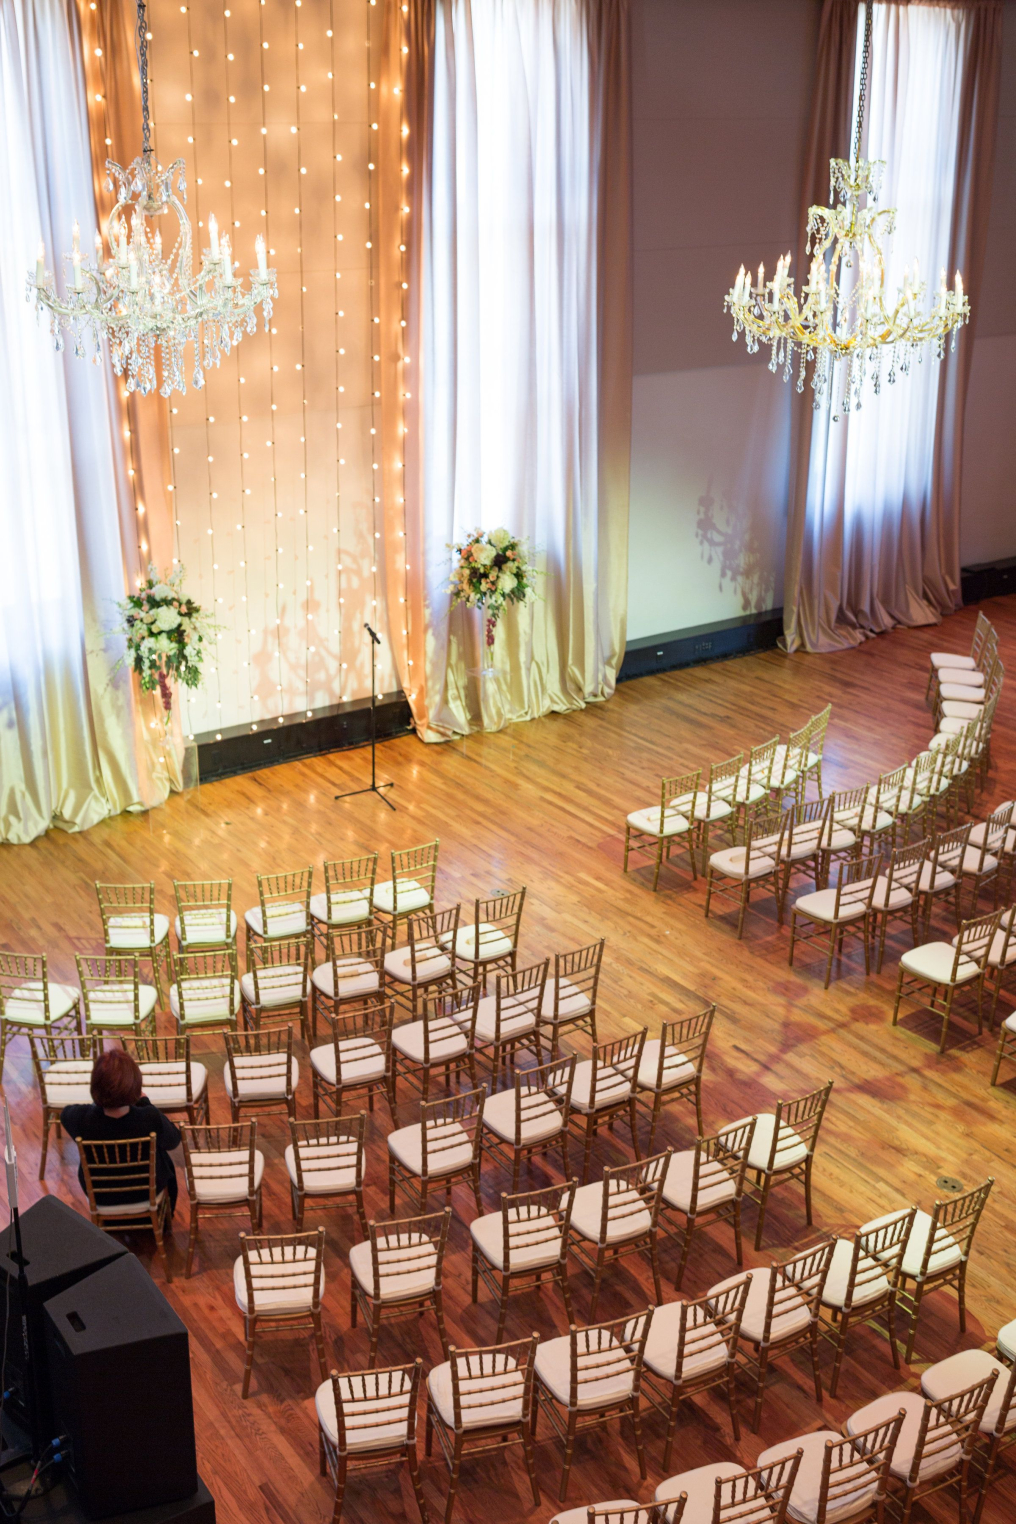 The Bell Tower Venue photo